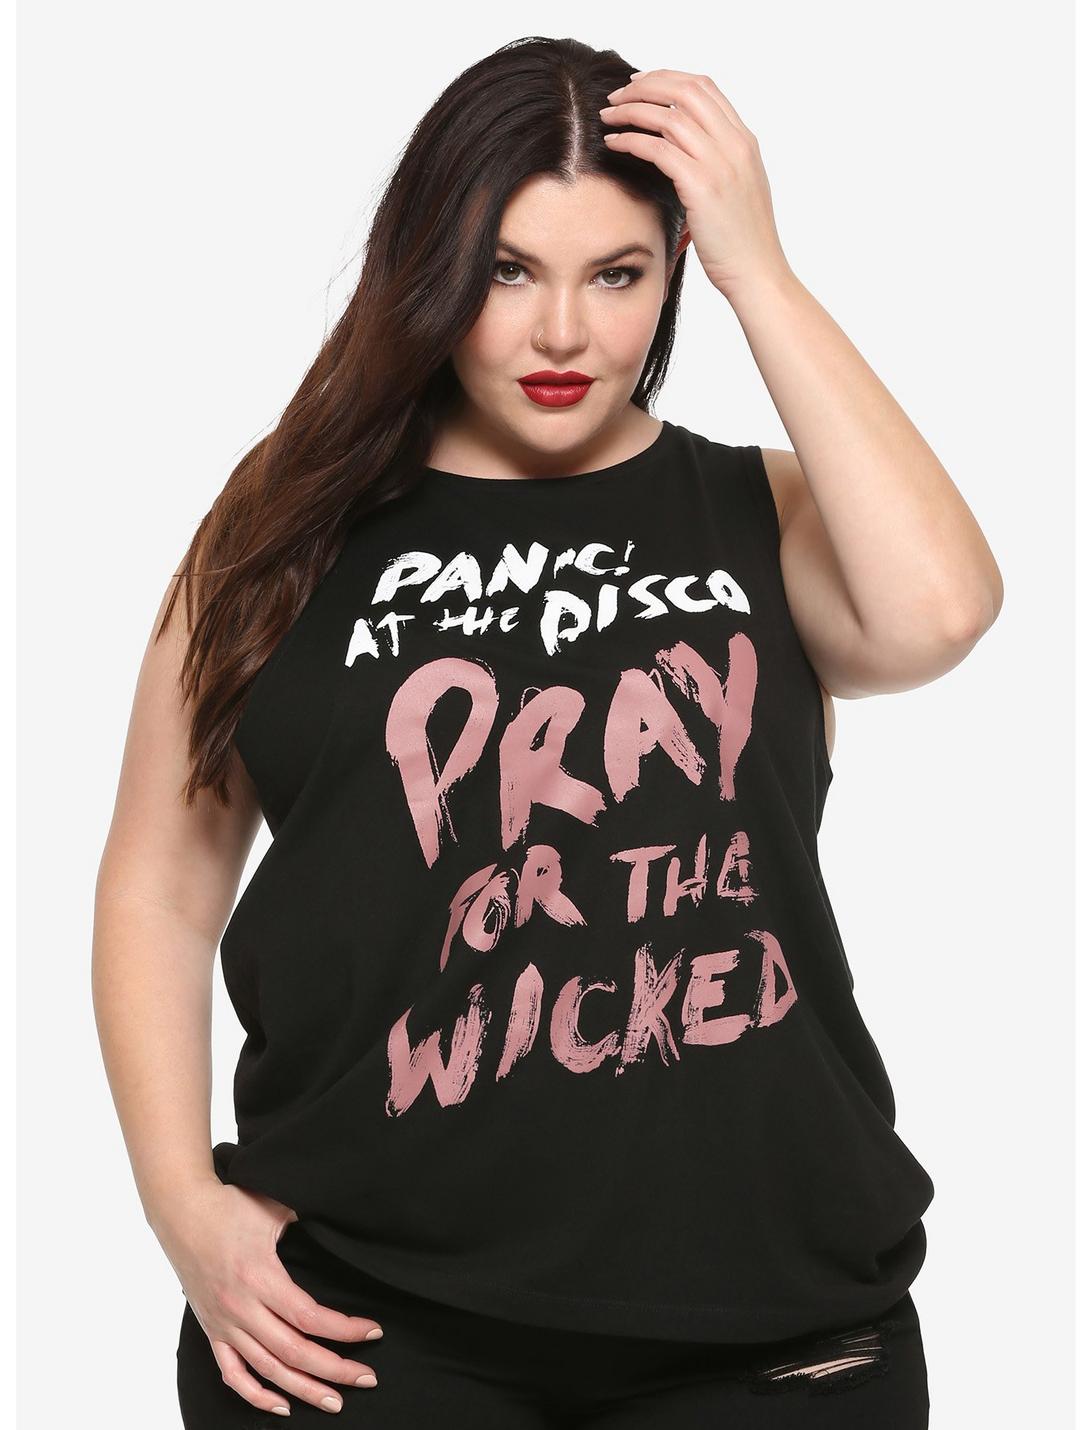 Panic! At The Disco Pray For The Wicked Girls Muscle Top Plus Size, RED, hi-res